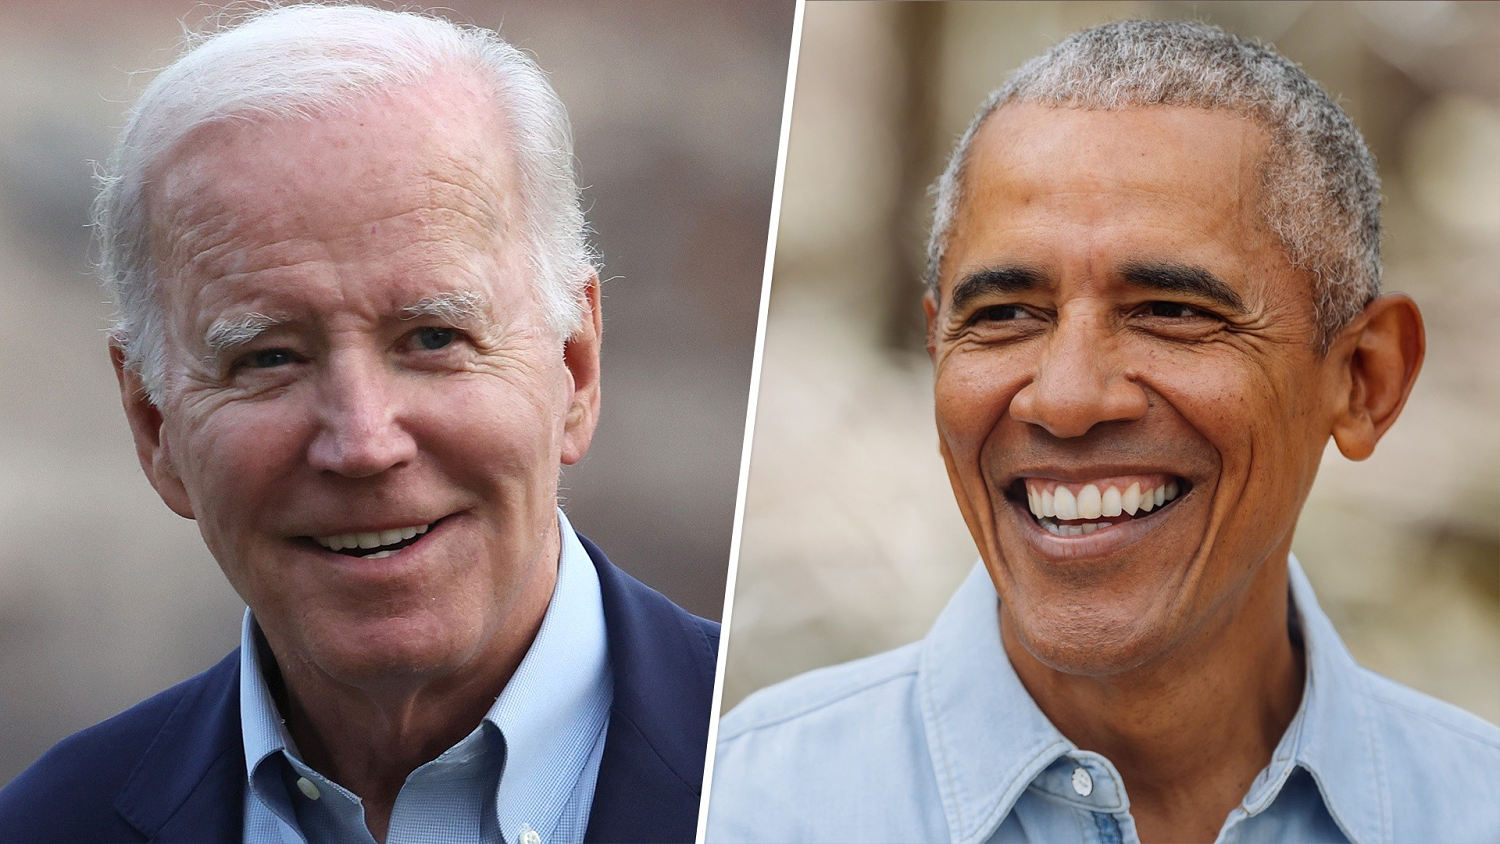 Clinton, Obama, celebs to join Biden in NYC for fundraising event